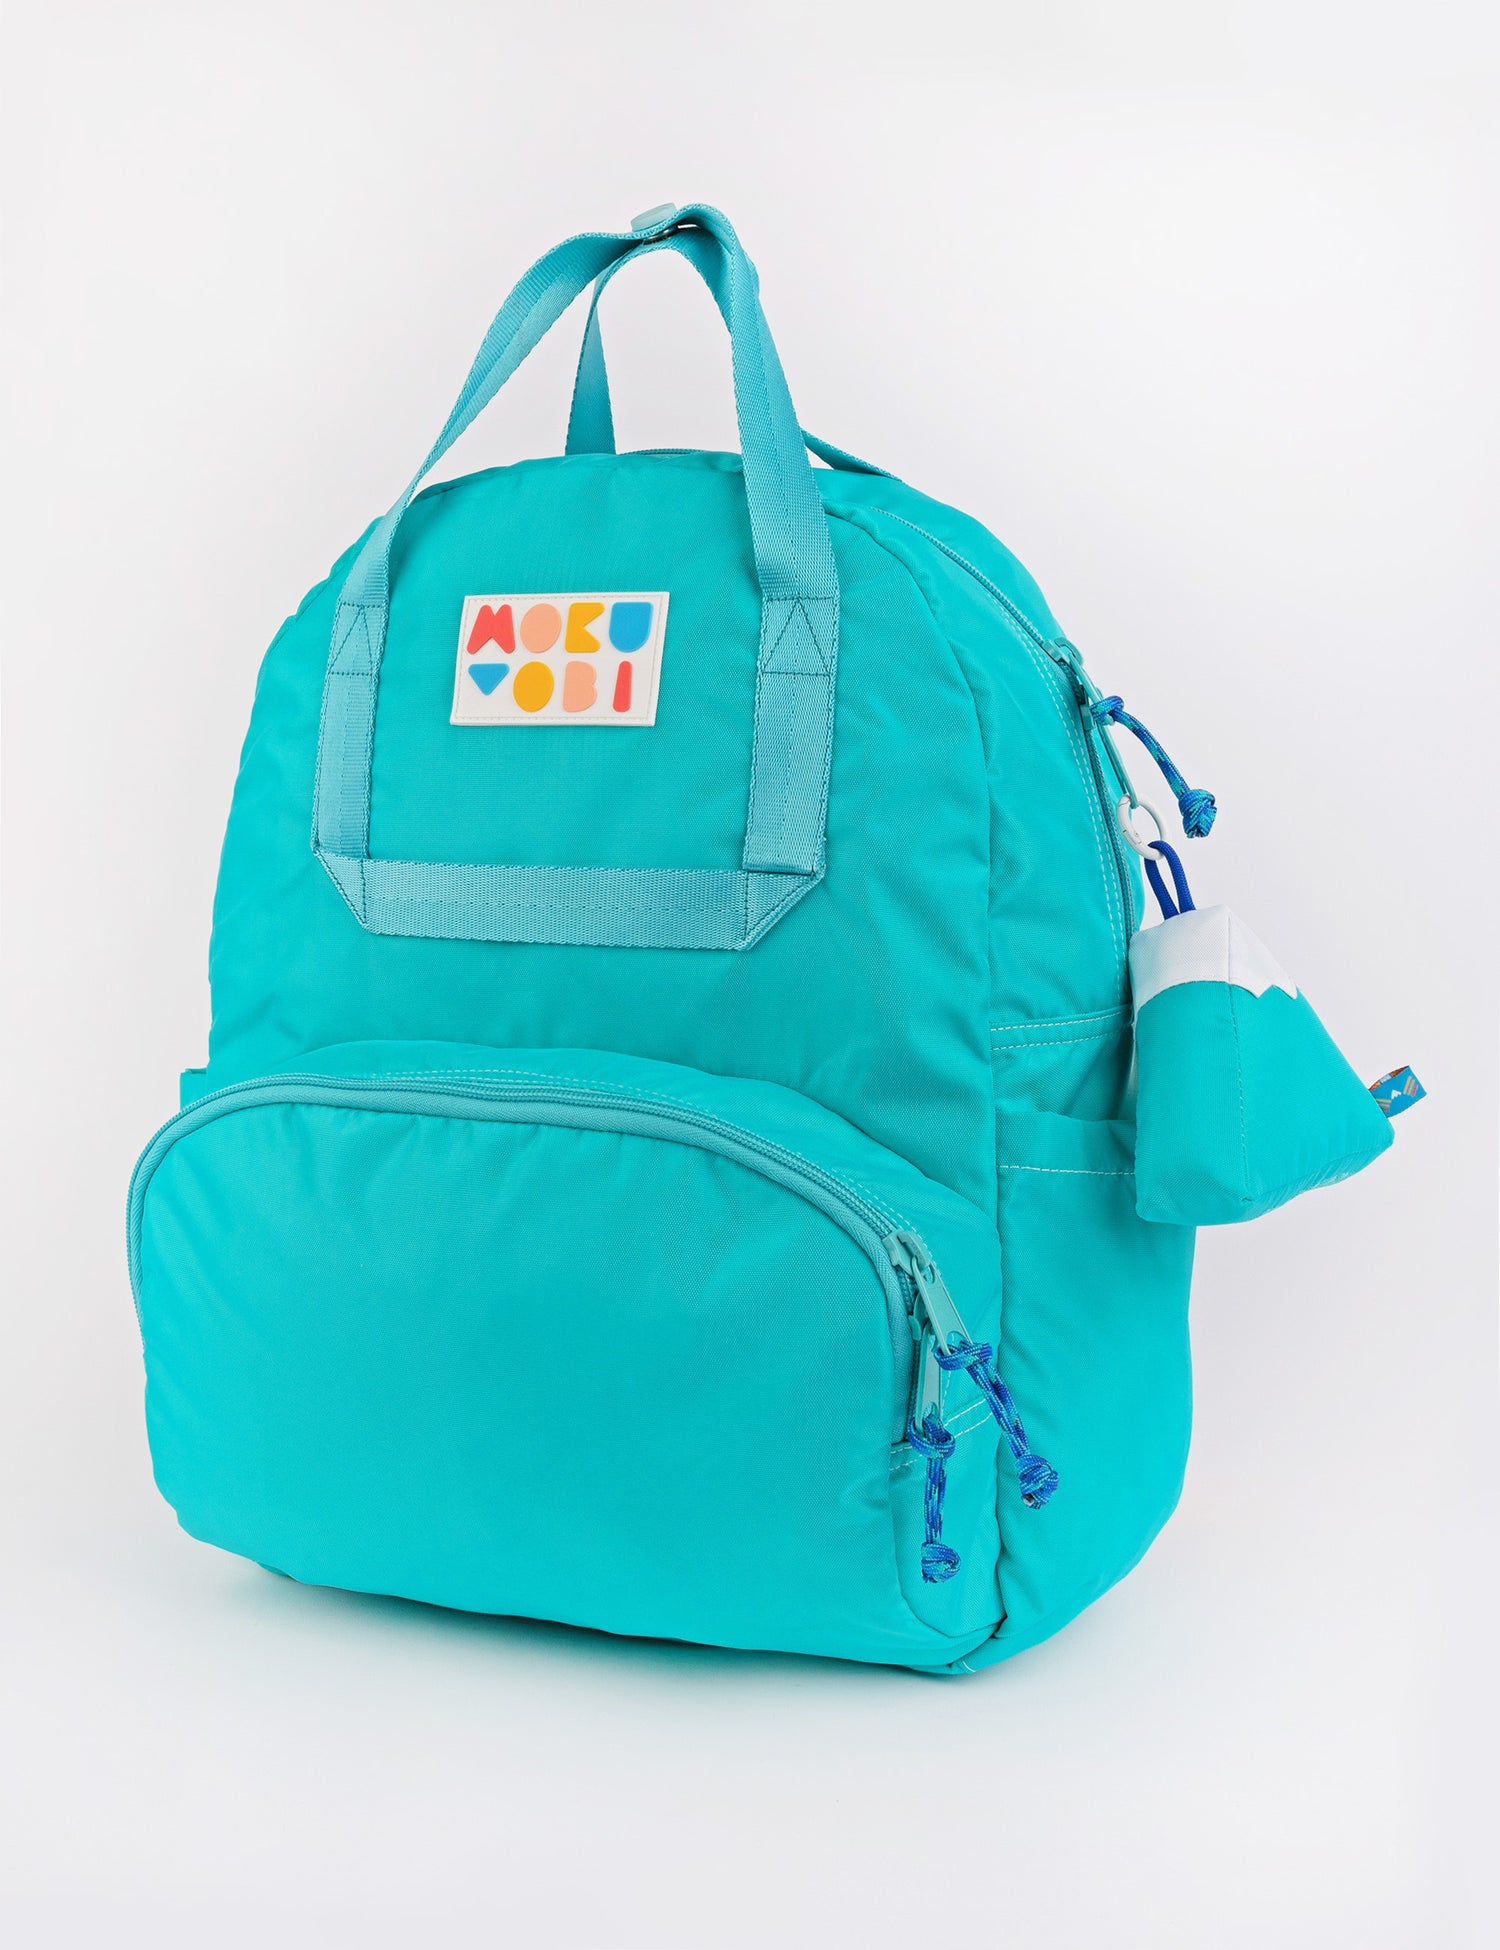 A Seafoam blue colored backpack with a keychain accessory